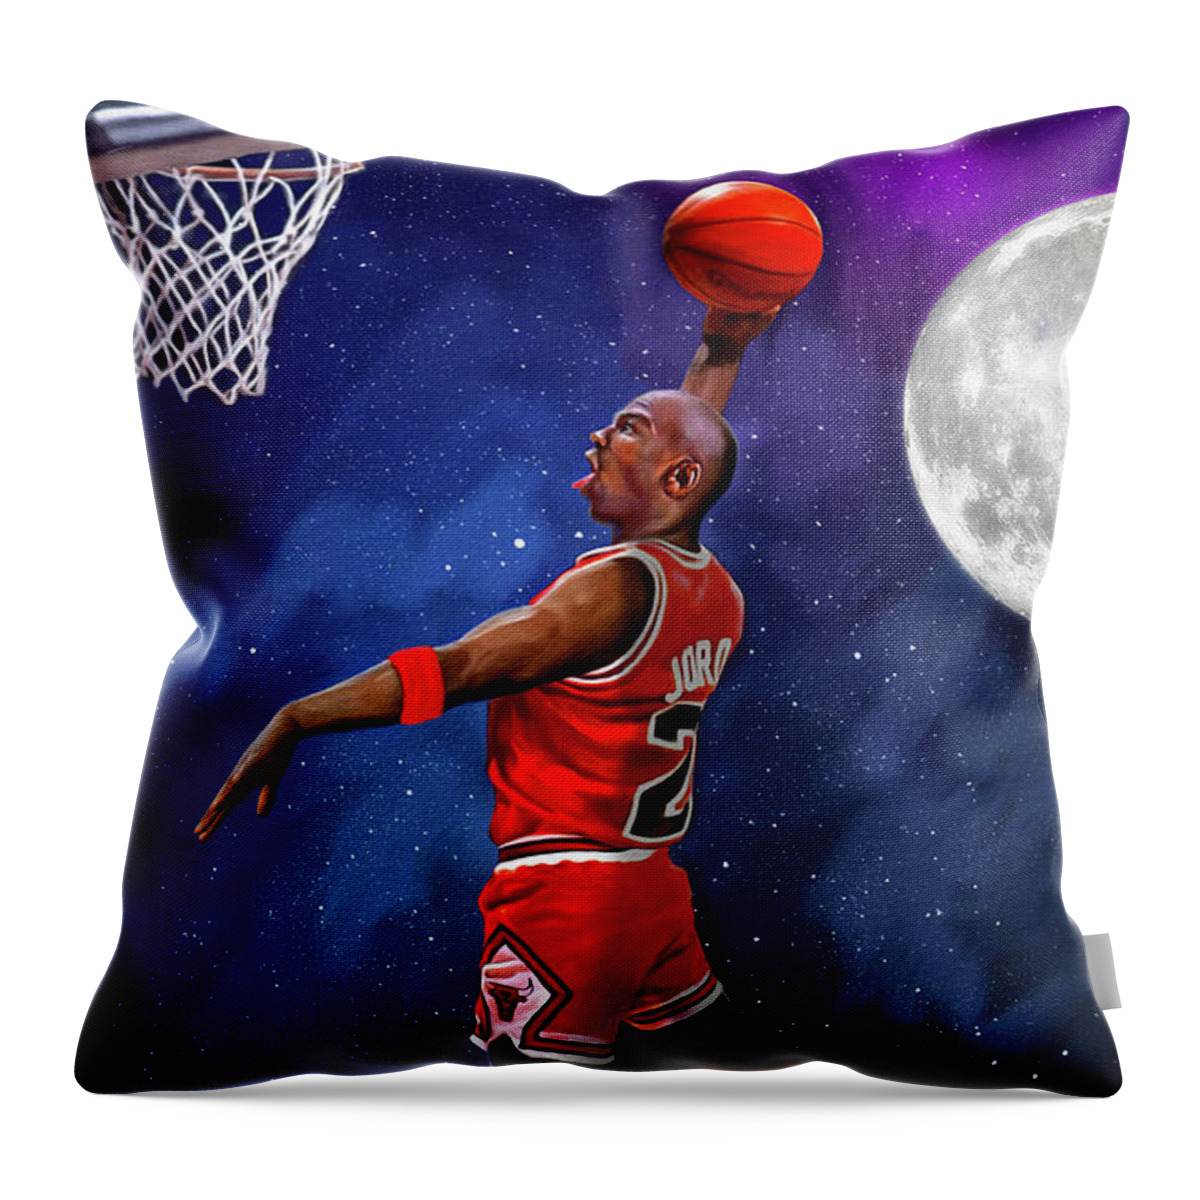 Space Jam Throw Pillow featuring the mixed media Space Jam Michael Jordan by Mark Spears